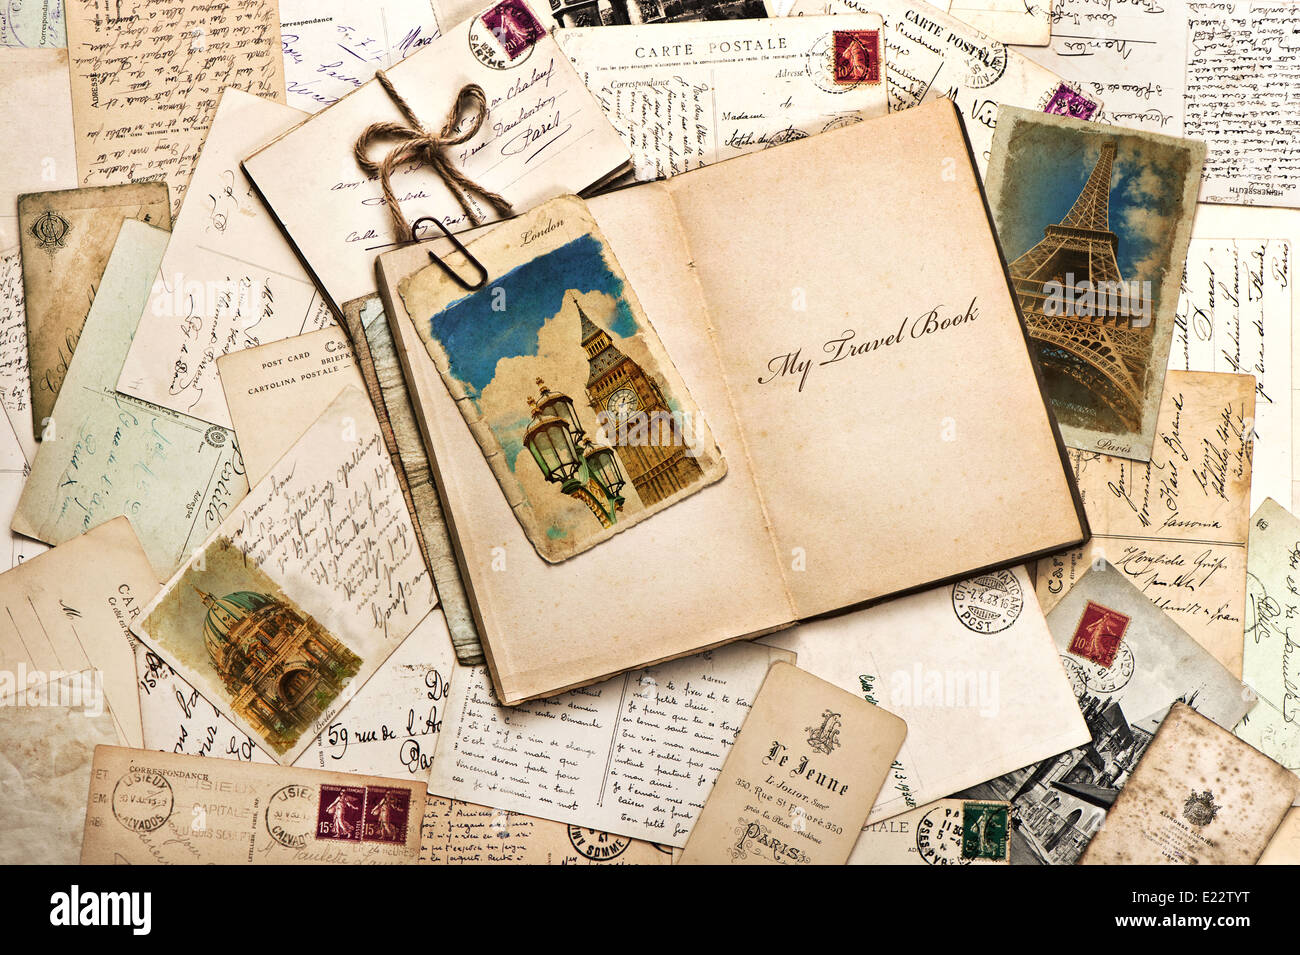 old postcards, letters, mails and open journal with sample text My Travel Book. vintage style travel background Stock Photo